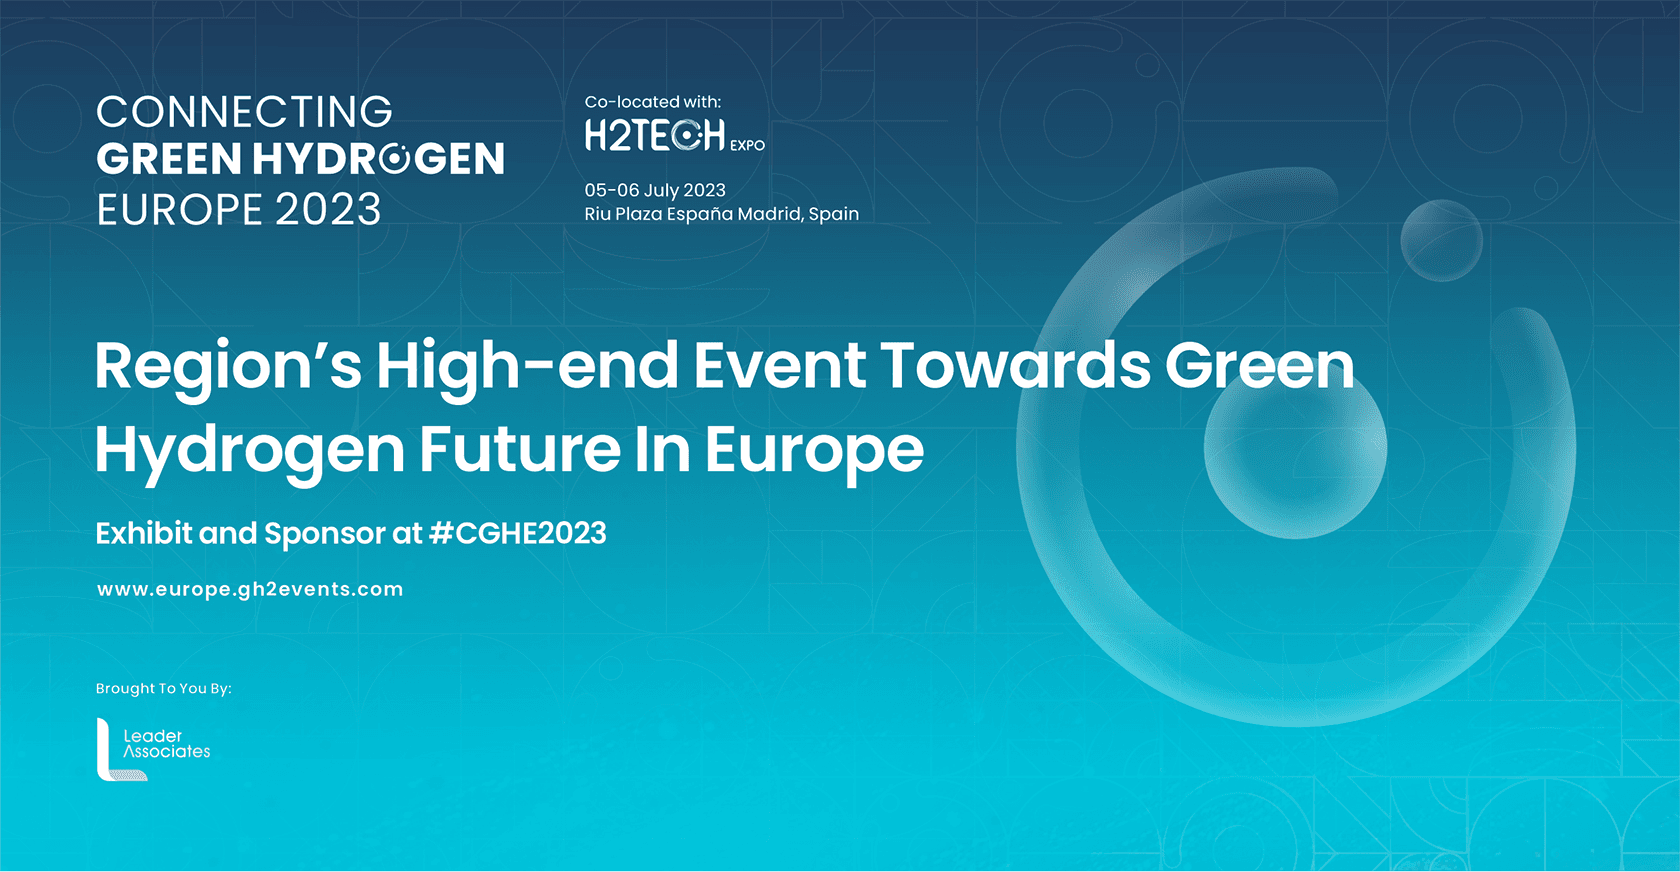 Networking | Connecting Green Hydrogen Europe 2023 Conference and Exhibition